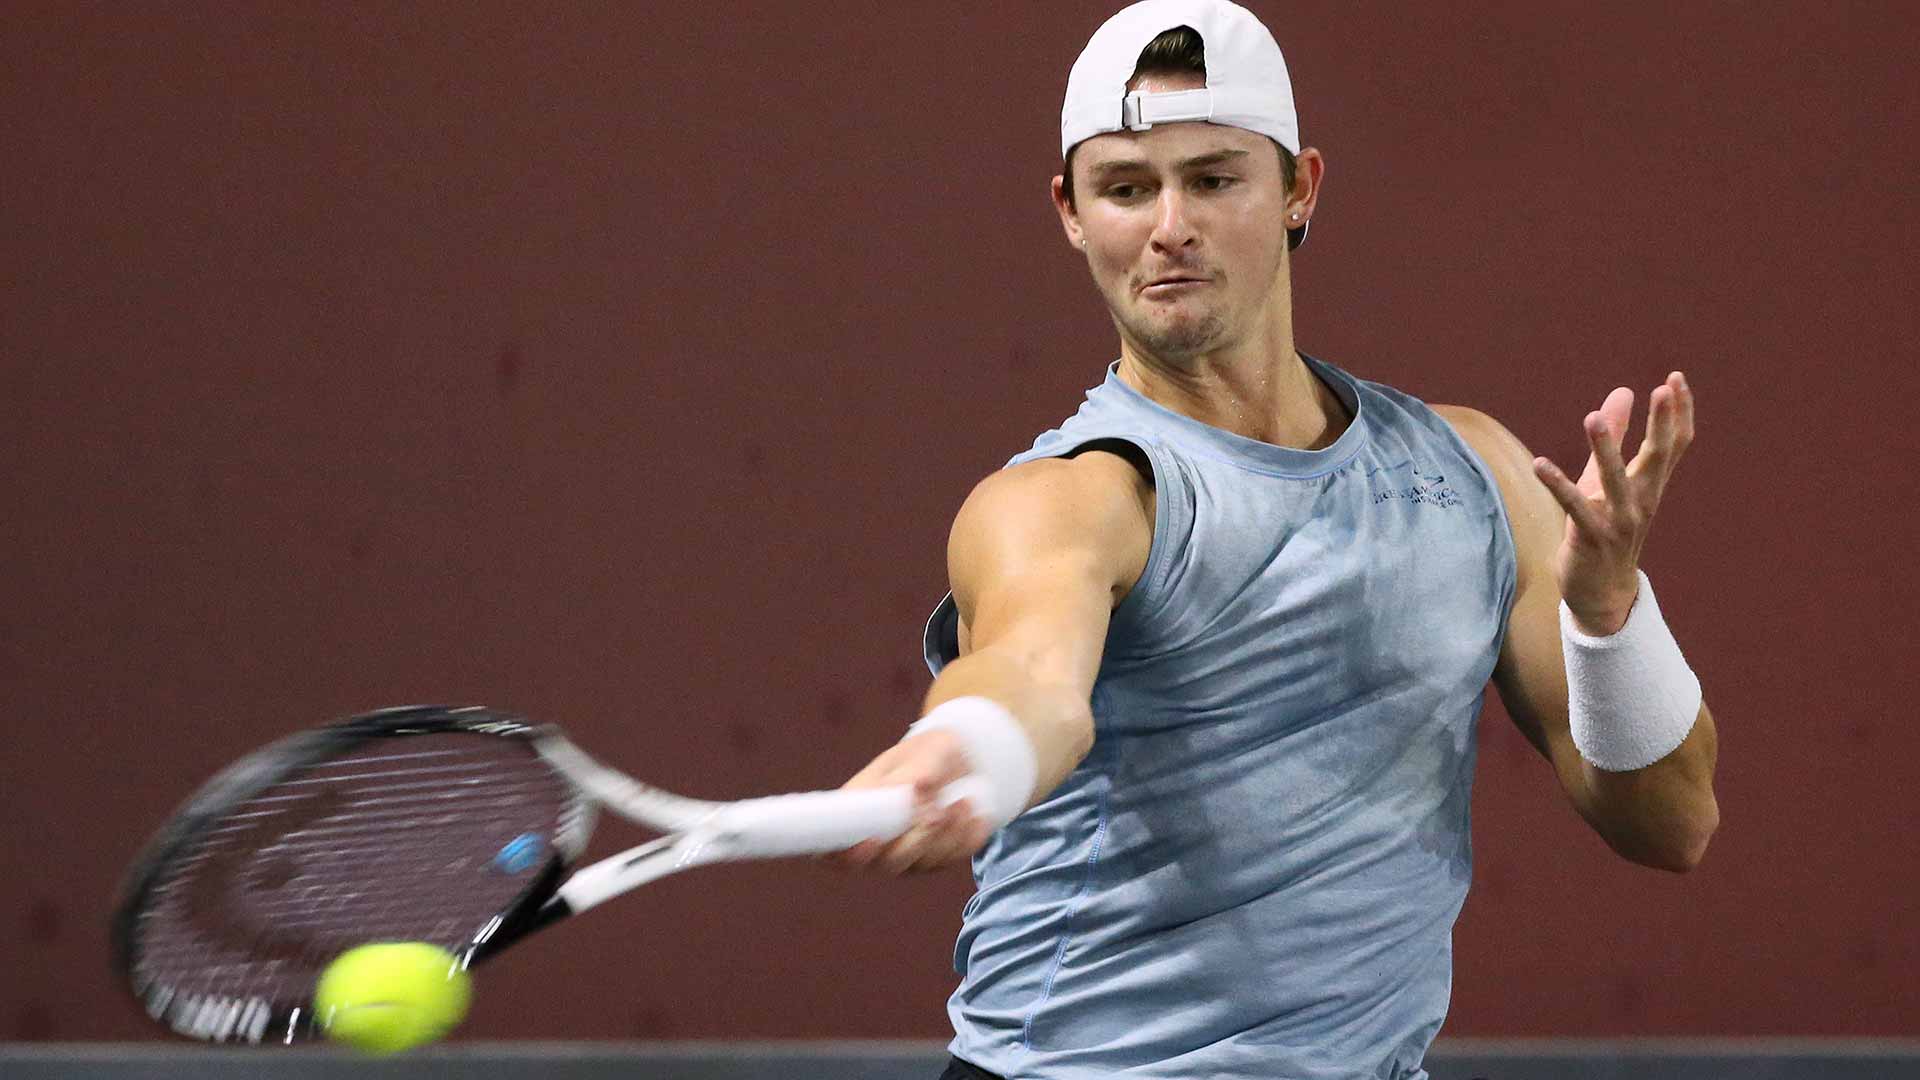 J.J. Wolf reaches his first ATP Tour final by advancing to the title match in Florence.